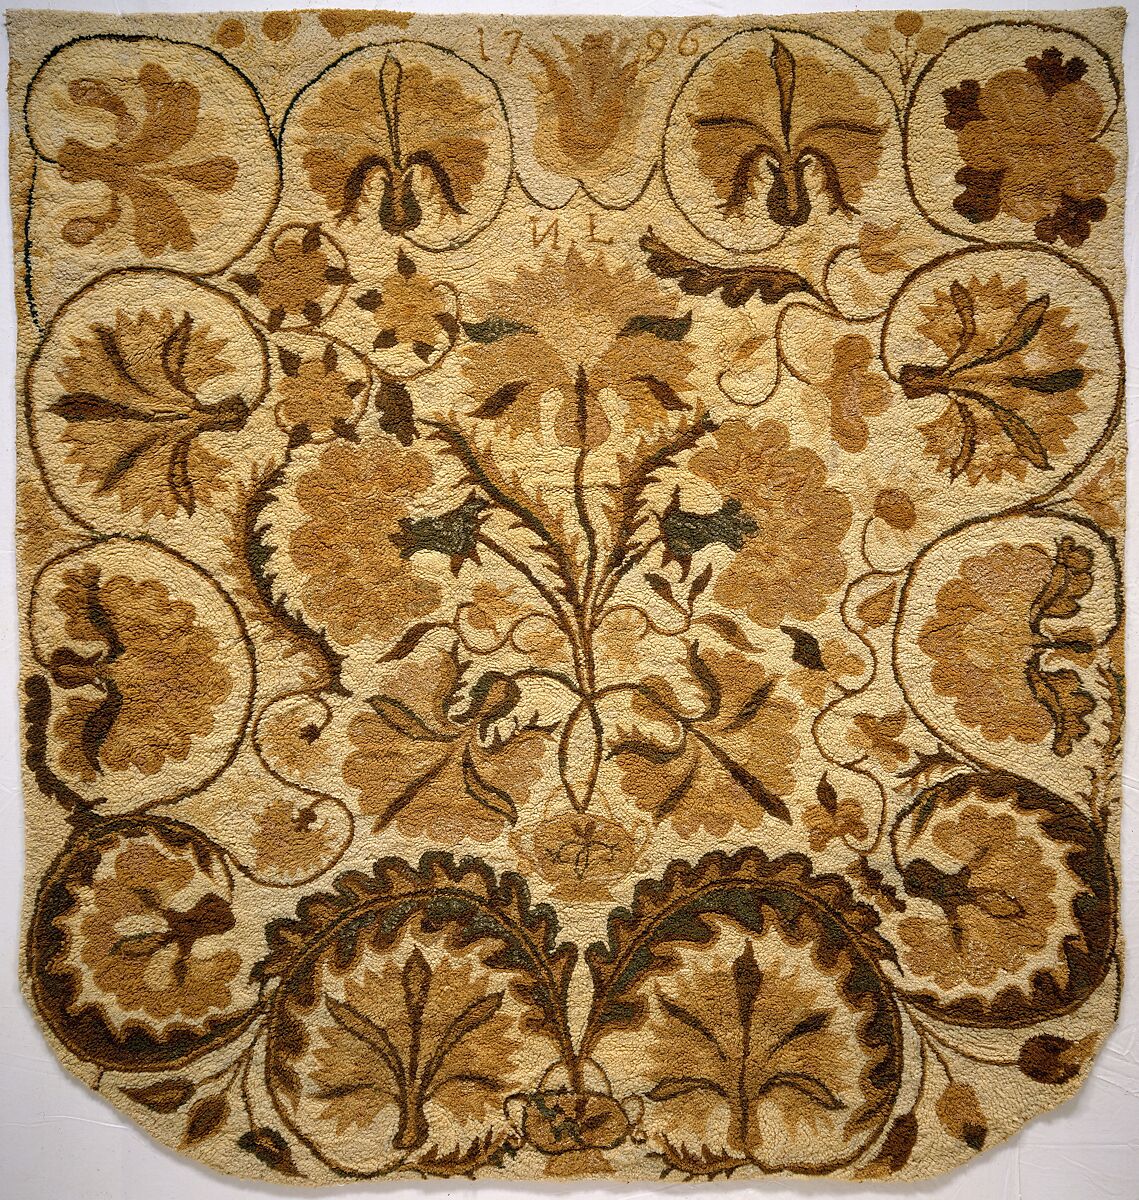 Bed rug, N. L., Wool embroidered with wool, American 